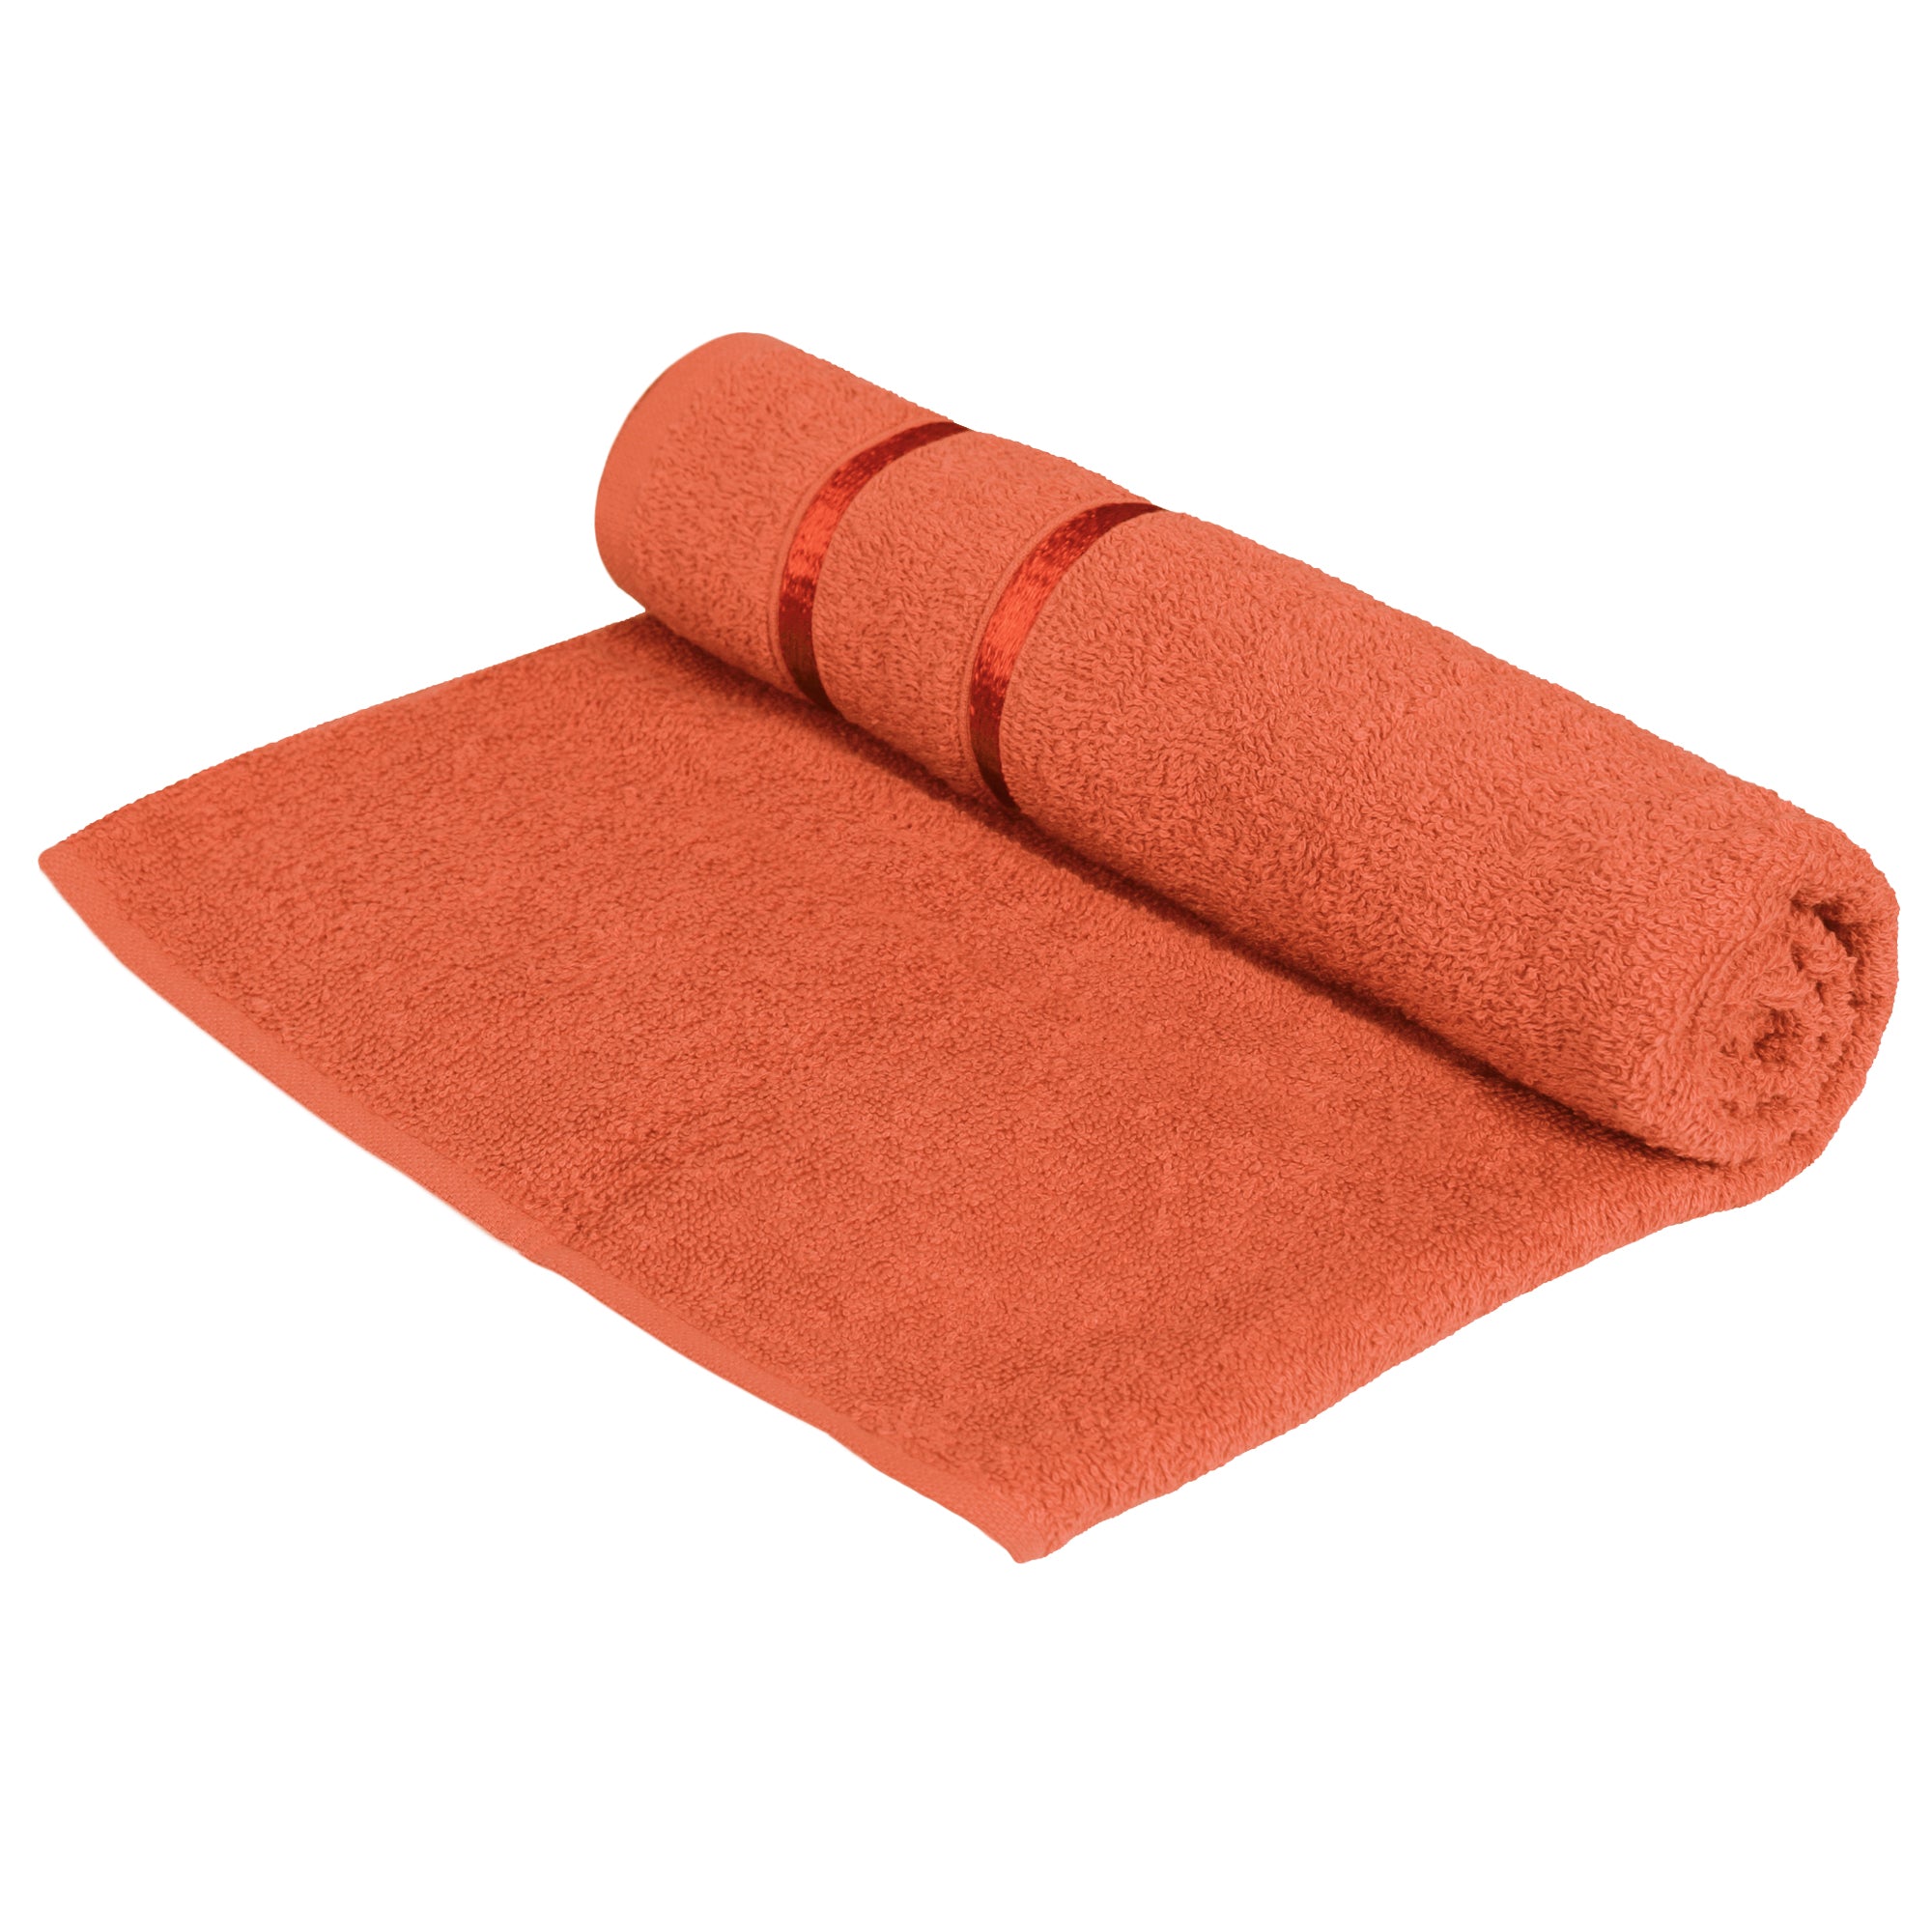 Story@Home 2 Units 100% Cotton Ladies Bath Towels - Green and Orange